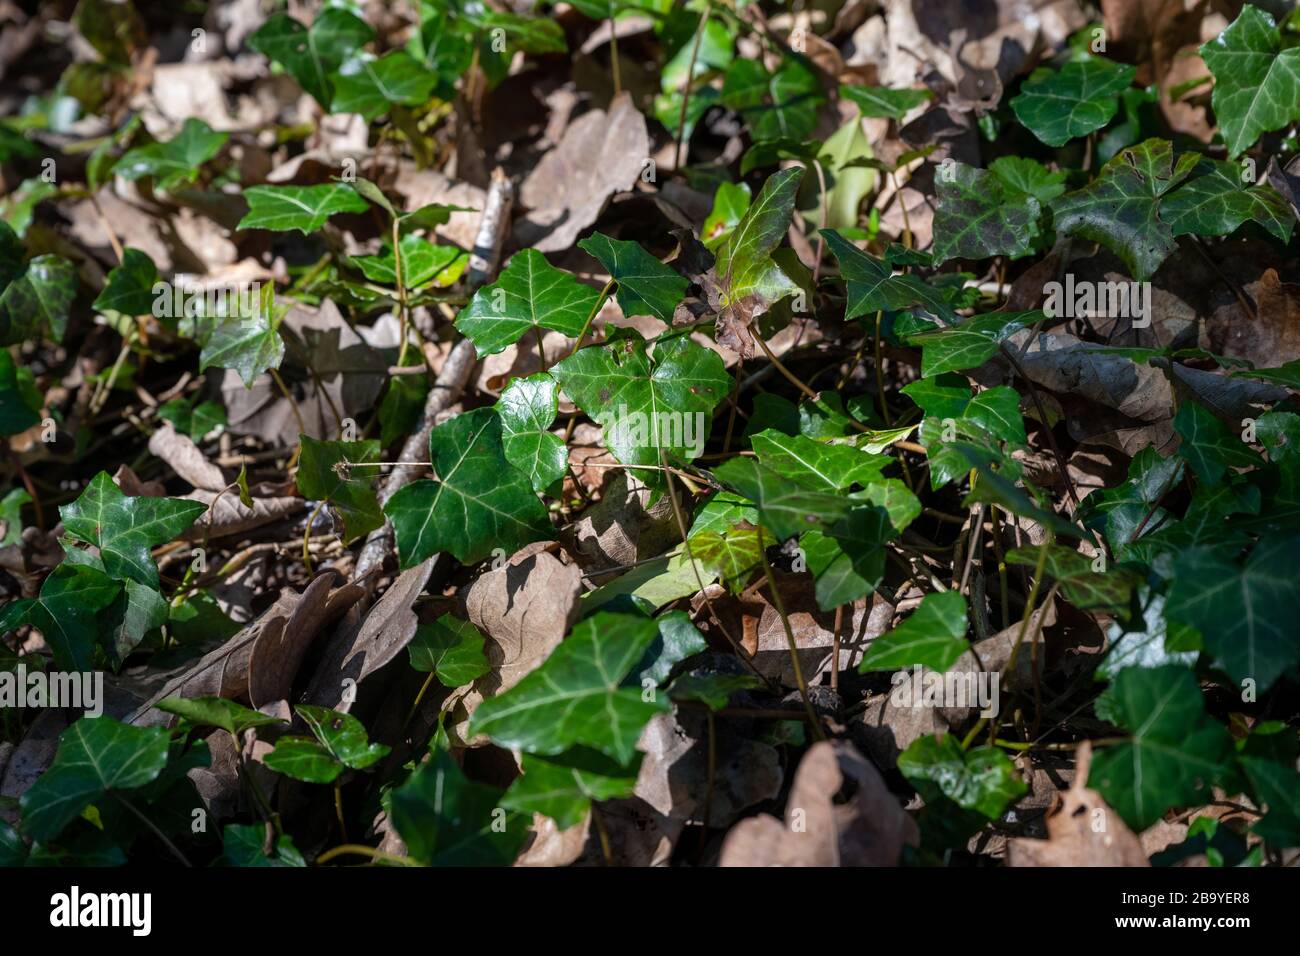 Ivy growing wild on the ground in a patch of woodland with a large number of brown fallen leaves in between the ivy leaves. Stock Photo